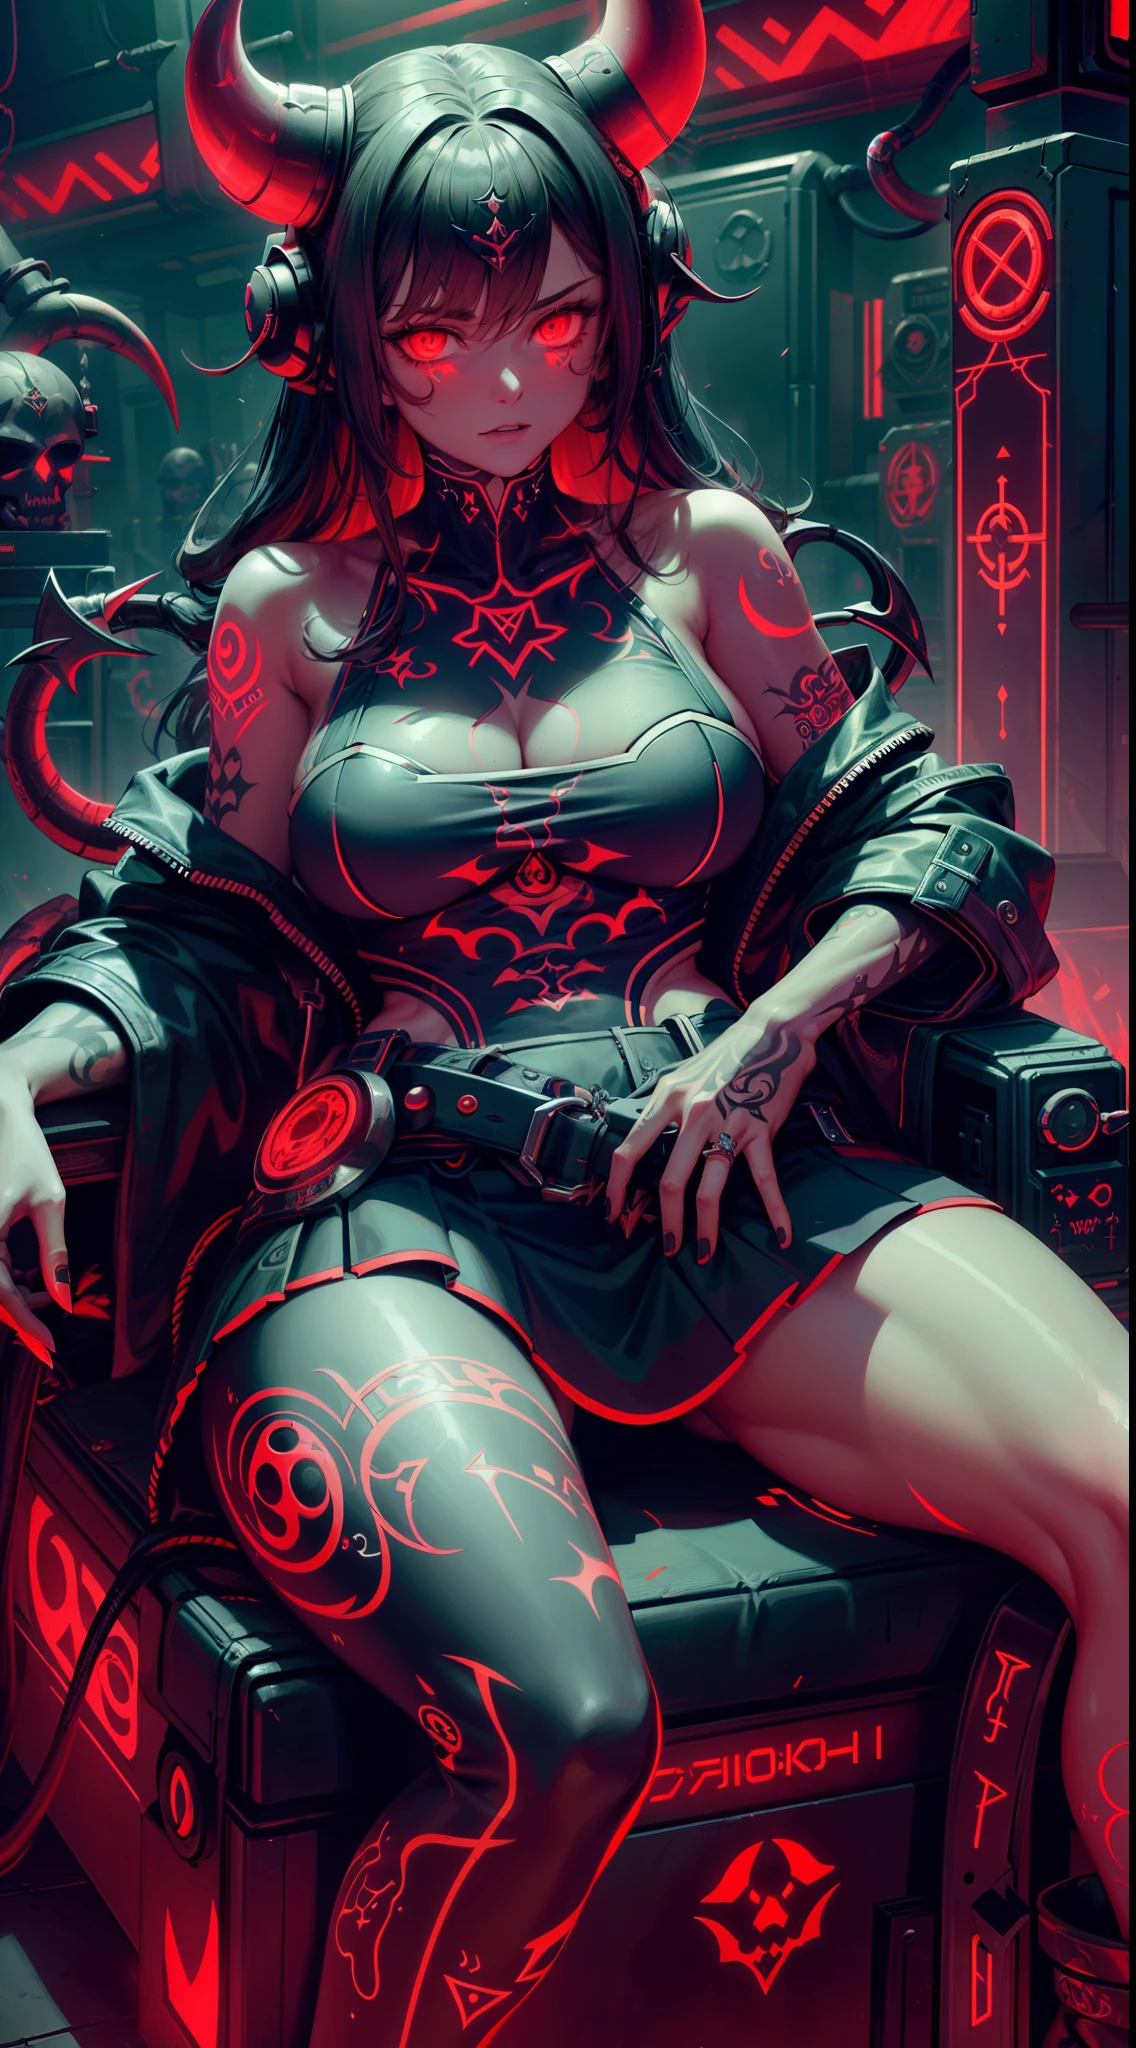 high resolution, Masterpiece artwork, best qualityer, 1girl, demonictech, many tattoos, futuristic clothing, skirt, sitting, neon details, neon cyberpunk style, in the background a shadowy laboratory, finely detailed skin, Breasts huge, very muscular legs